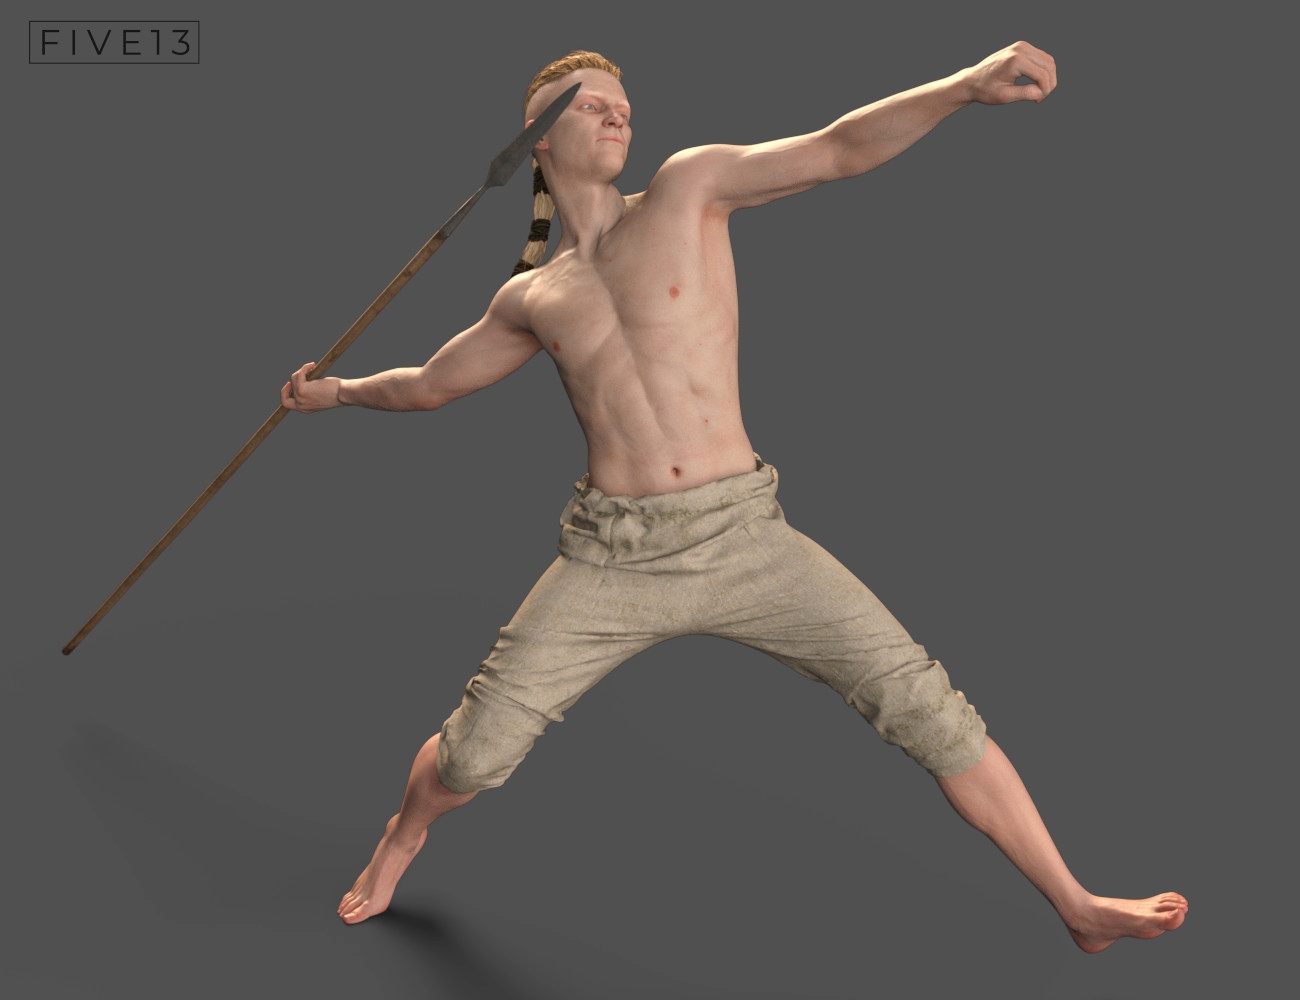 Authentic Viking Spear And Spear Poses For Daz Studio Five